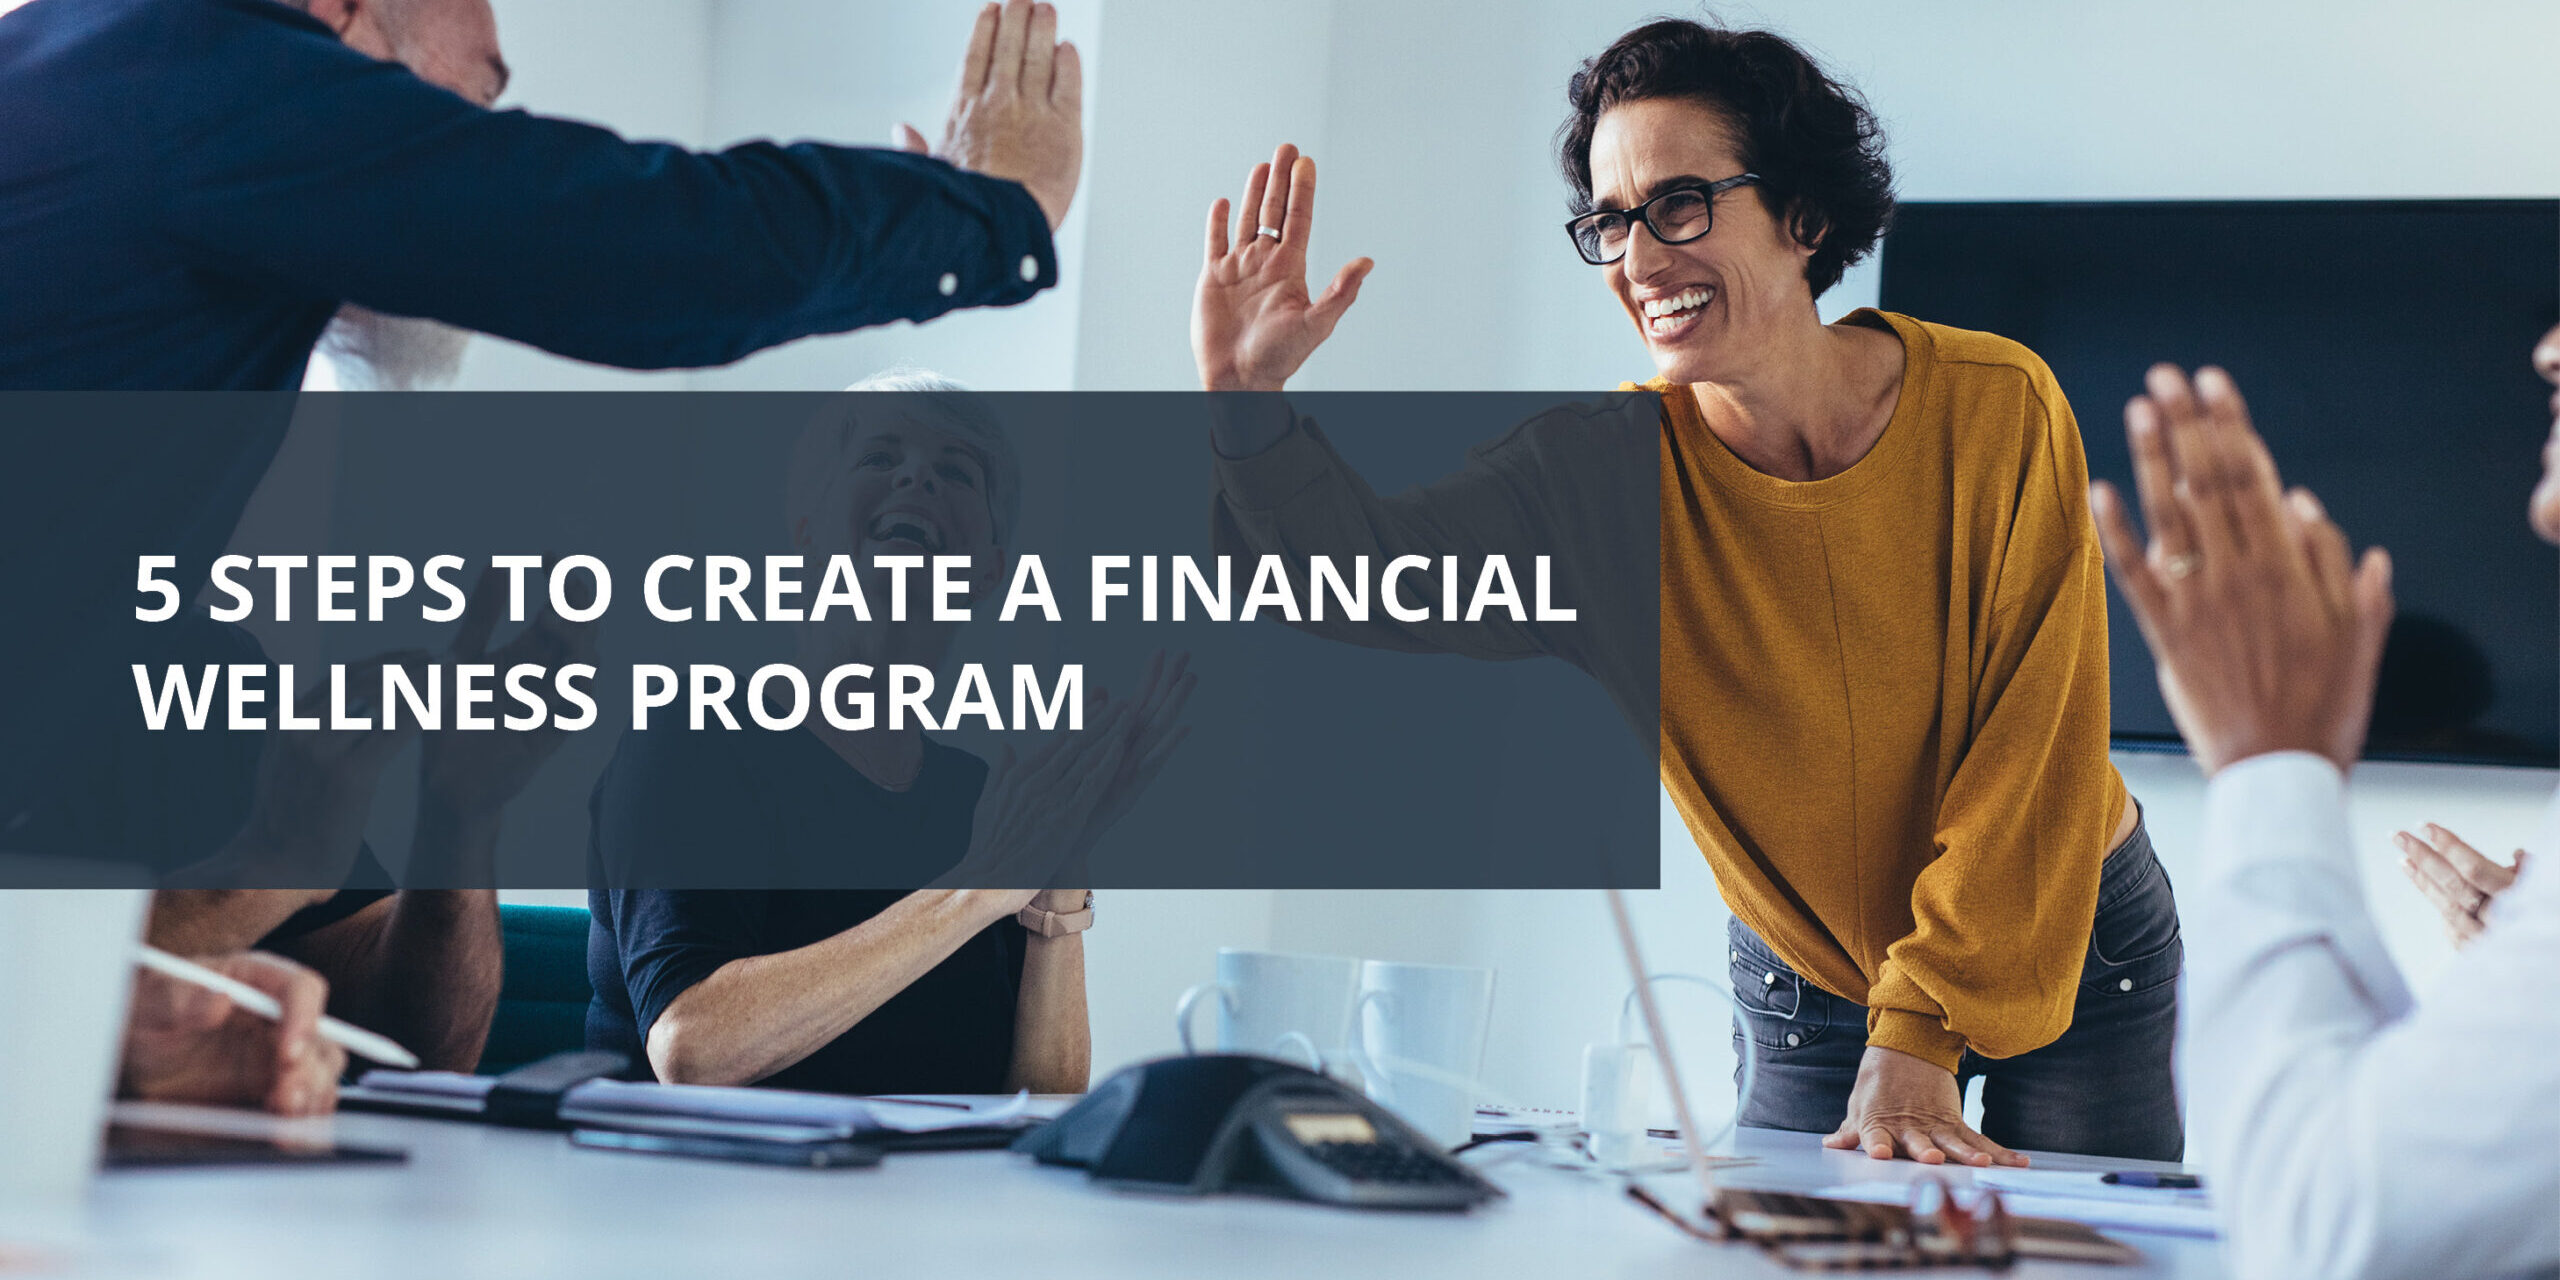 5 Steps to Create a Financial Wellness Program Safe Harbor Investment